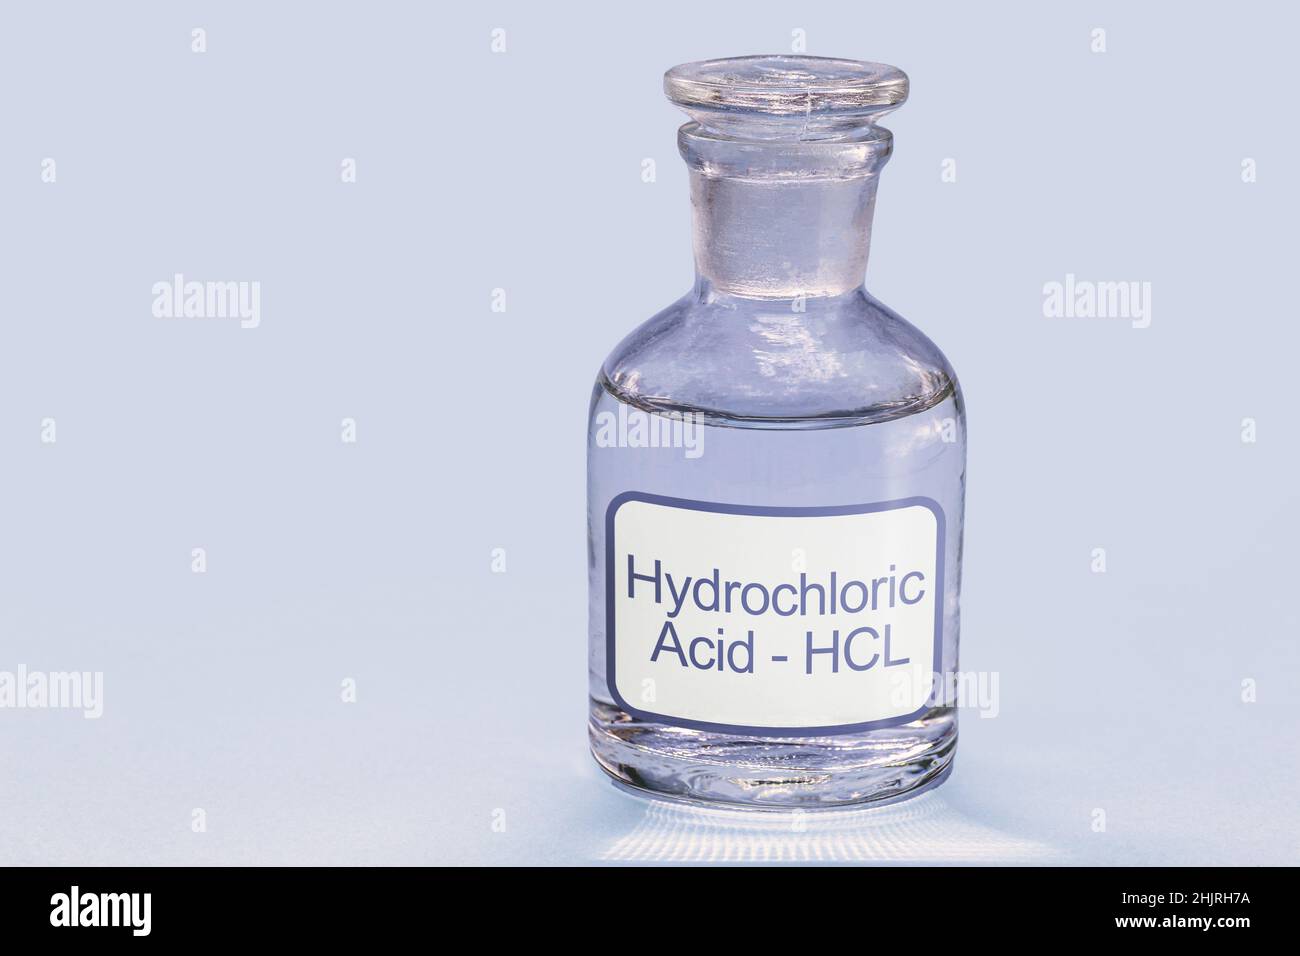 bottle of hydrochloric acid, a chemical solution used in cleaning and galvanizing metals, in tanning leather and obtaining various products Stock Photo